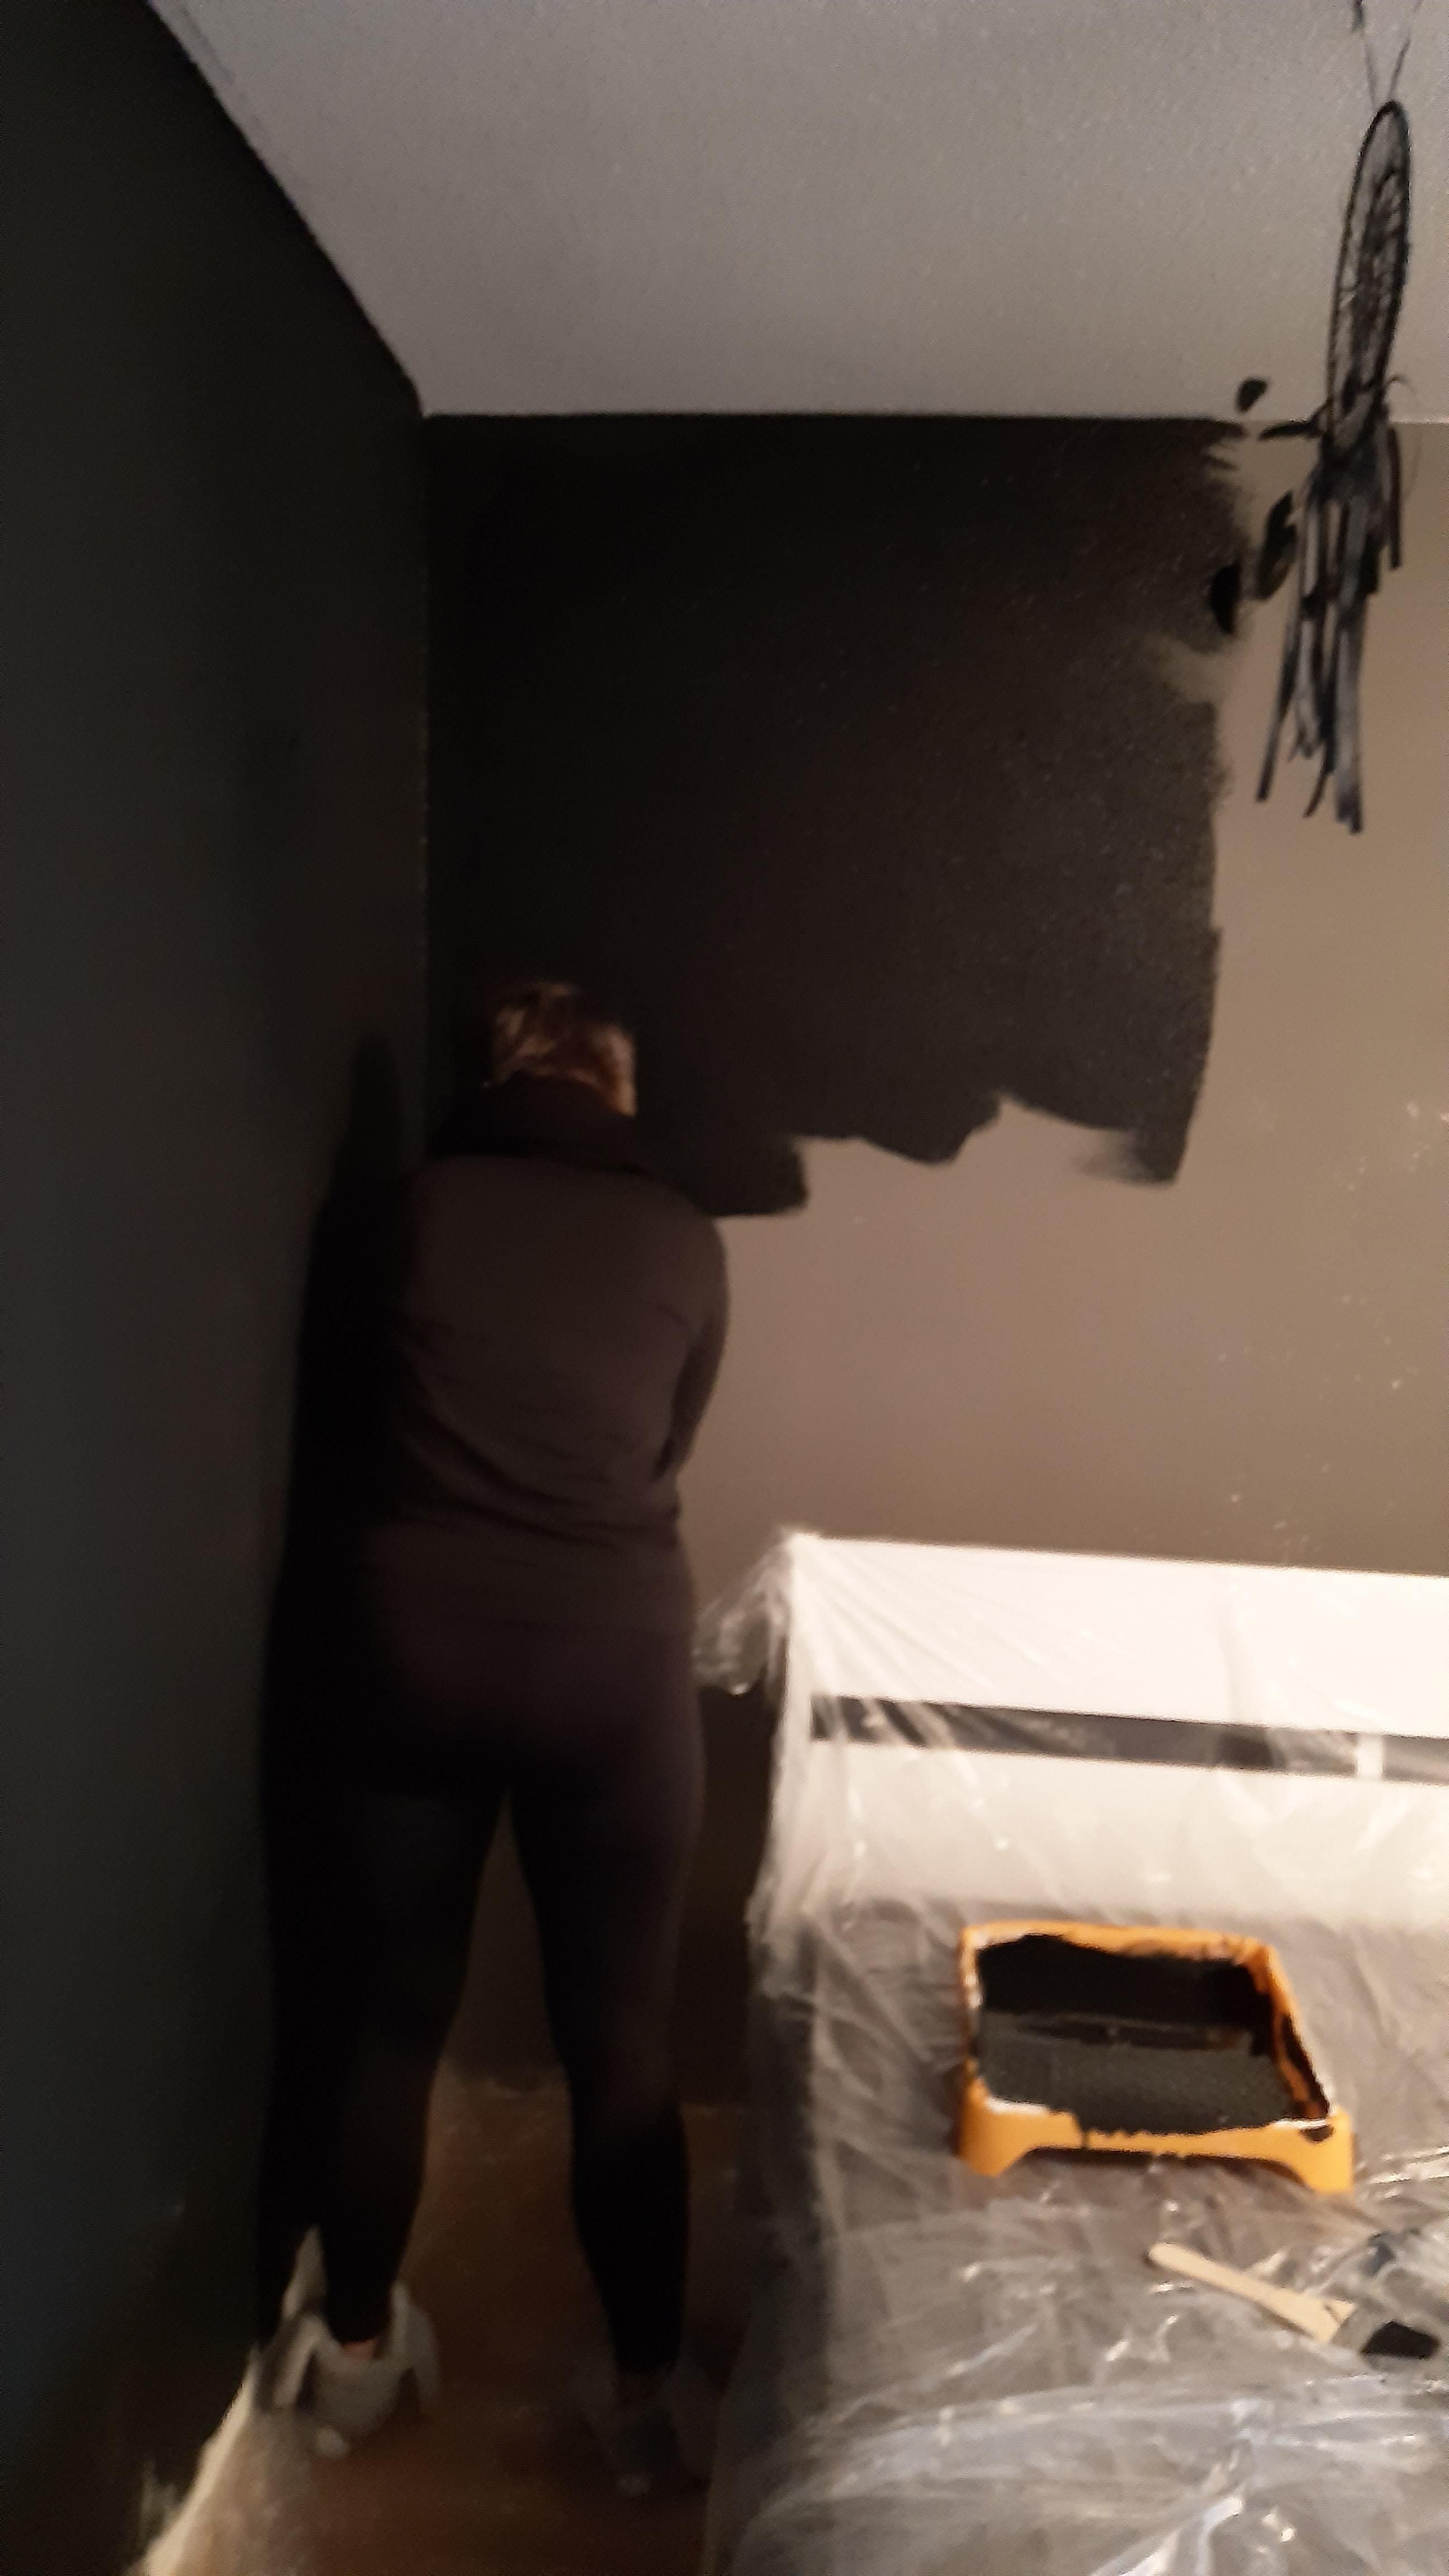 Wife got braces today. Now she's painting our room black. I think she's going through a phase.